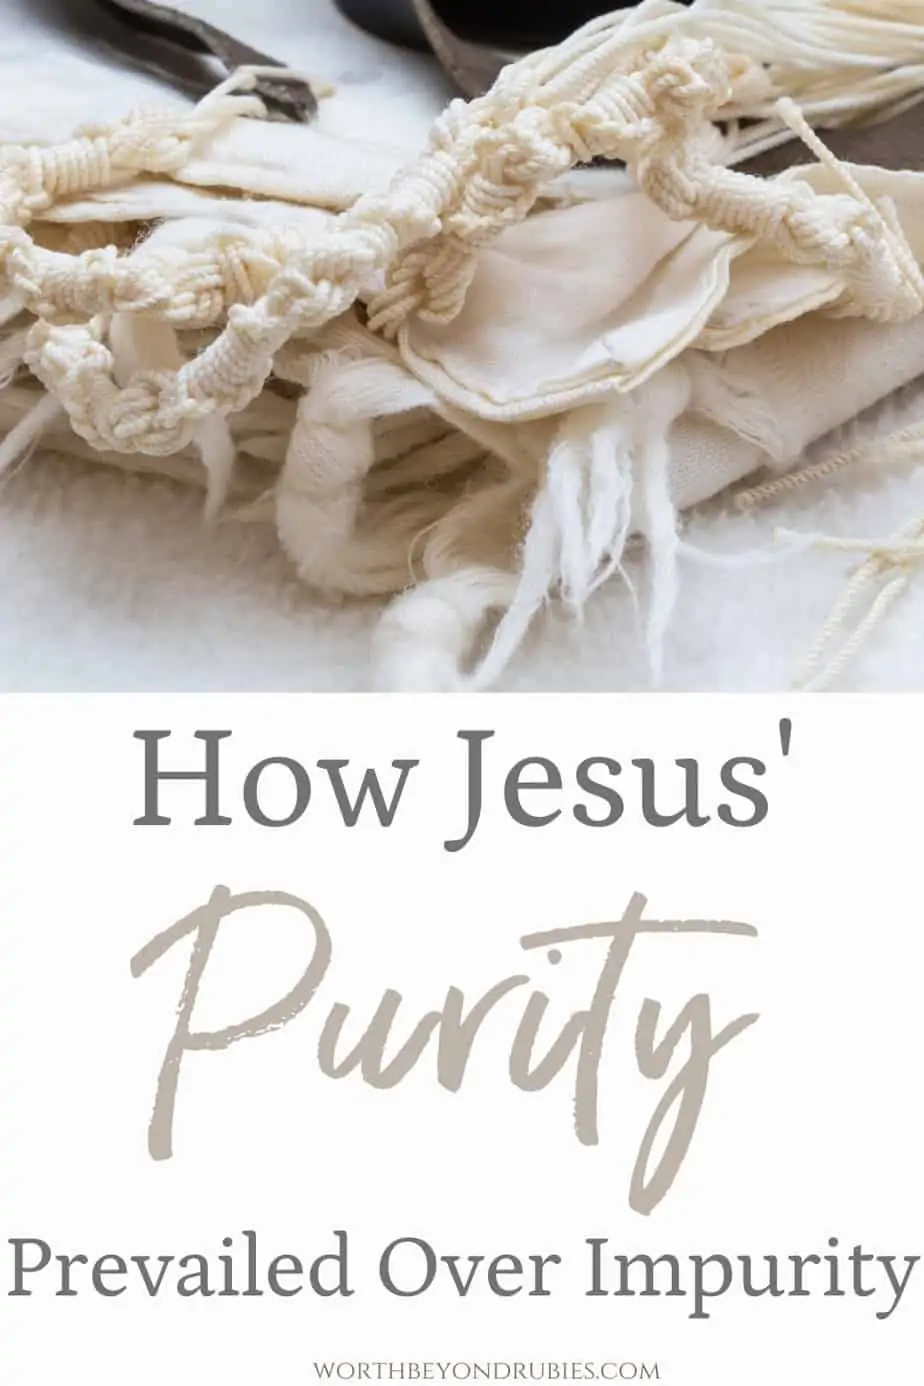 An image of tzitzit and text that says How Jesus' Purity Prevailed Over Impurity